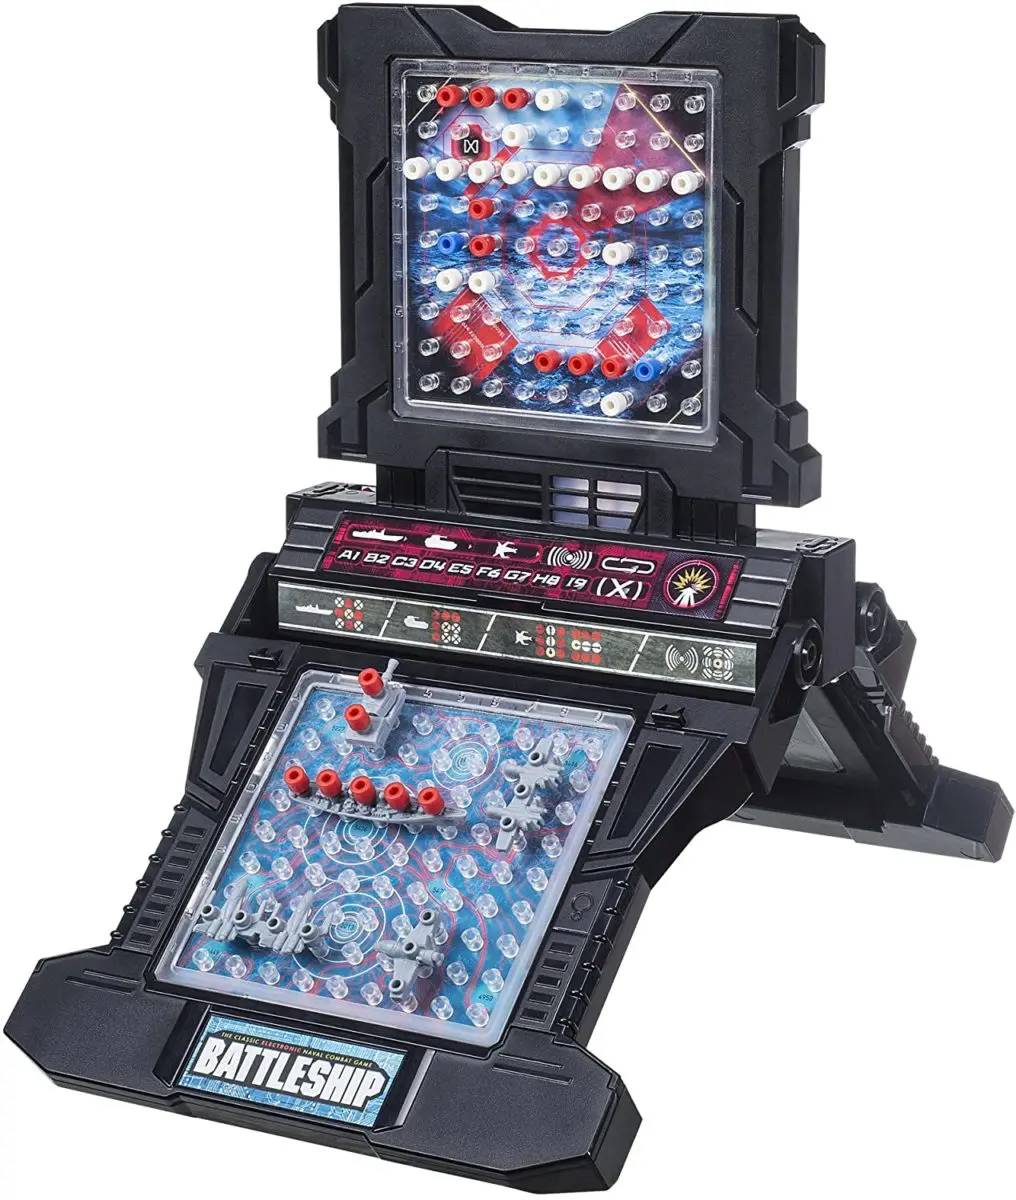 Electronic Battleship Game - Top Toys and Gifts for Ten Year Old Boys 2